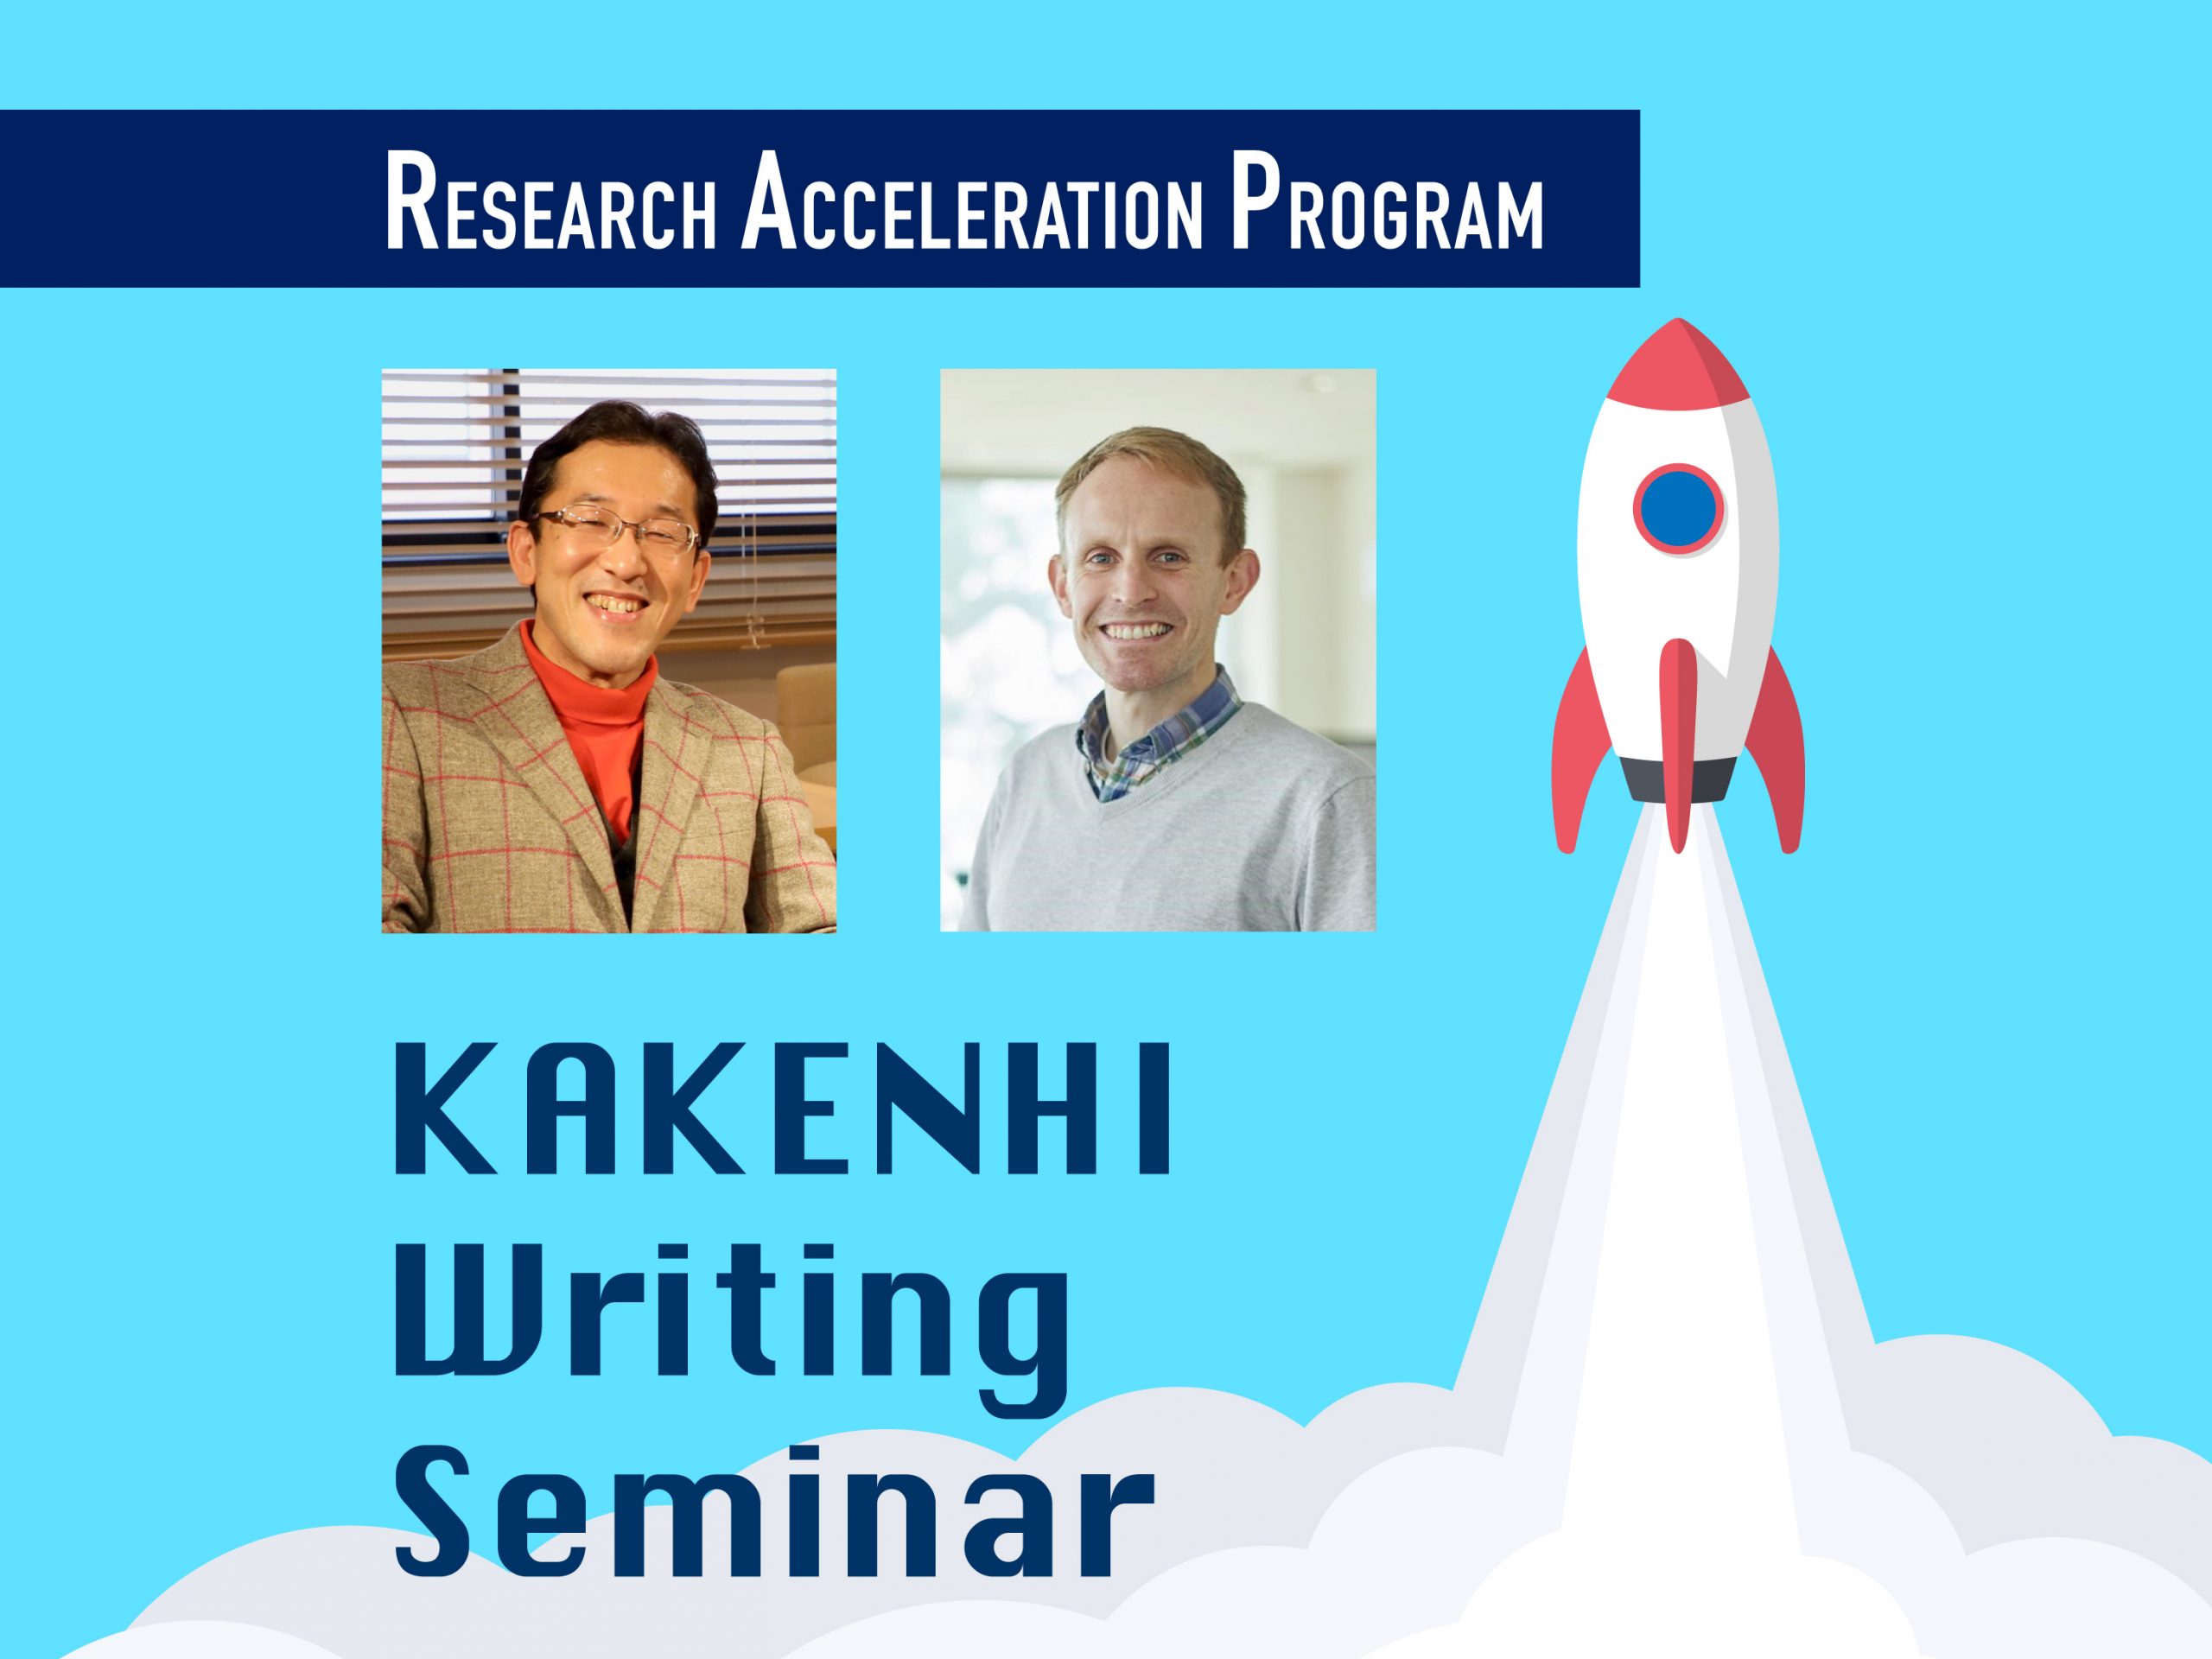 KAKENHI Writing Seminar: Telling your research story effectively